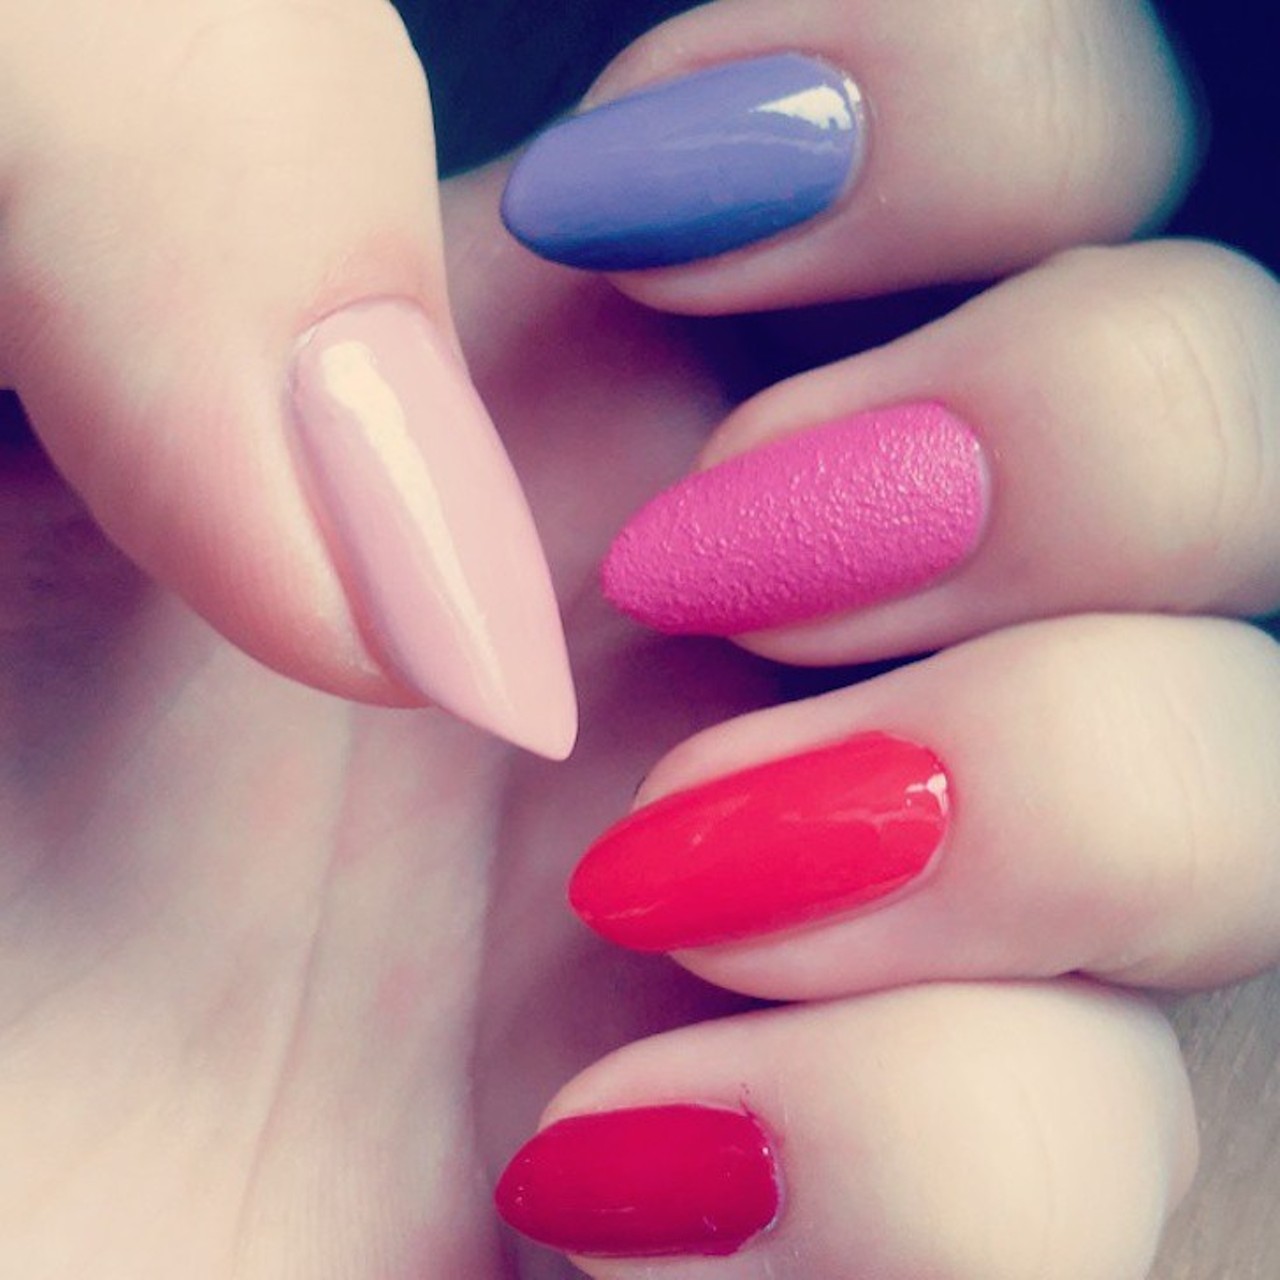 Go get your nails did so you can feel pretty. 
Photo via Instagram (dodo_not_dead)